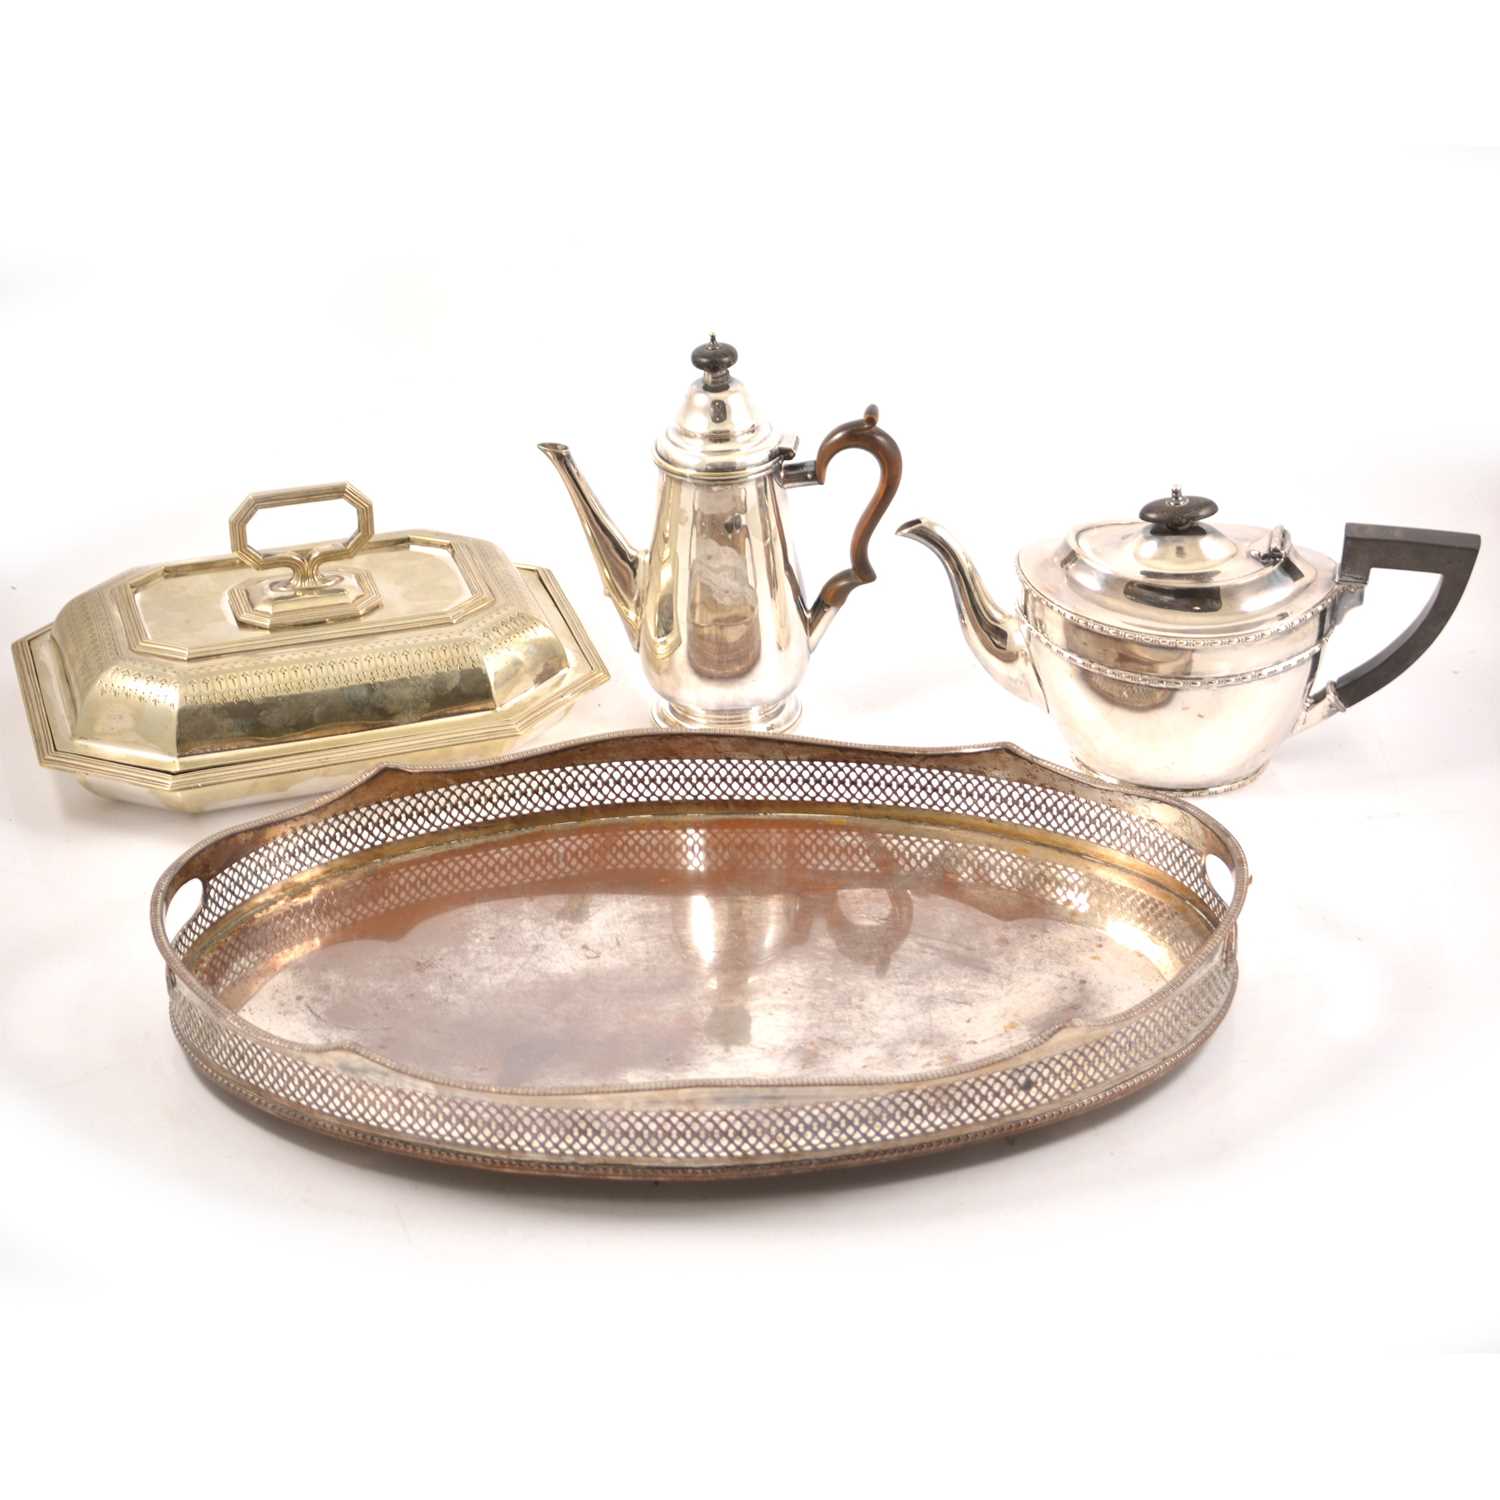 Lot 130 - One box of silver-plated wares, including entrée dish, tea pot, gallery tray, etc.